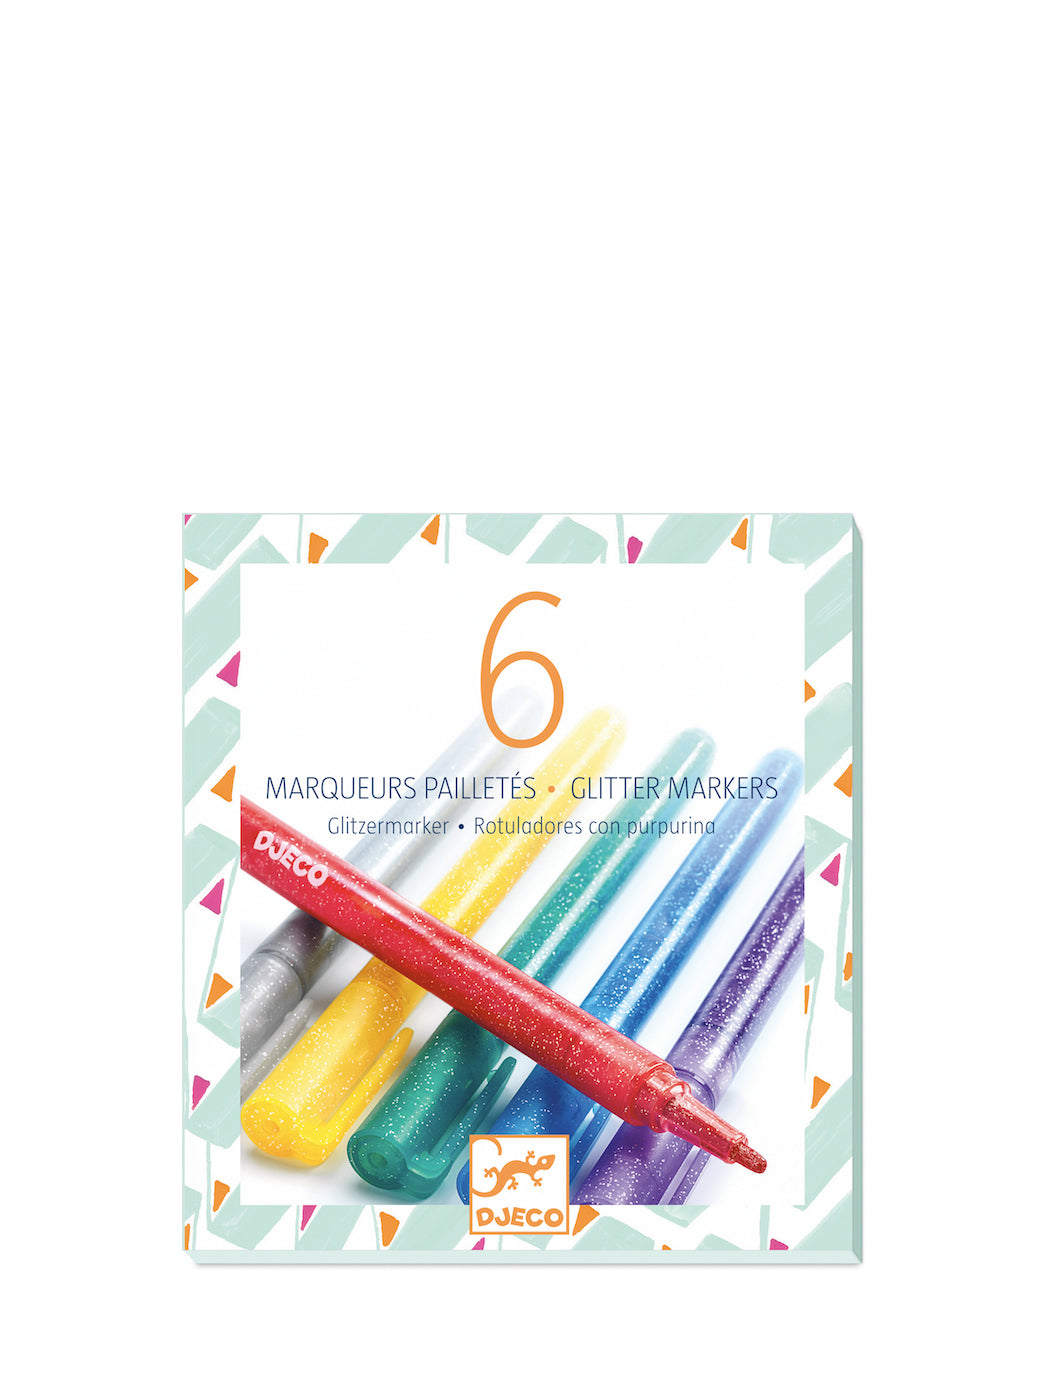 6 glitter markers: silver, yellow, green, blue, purple and red